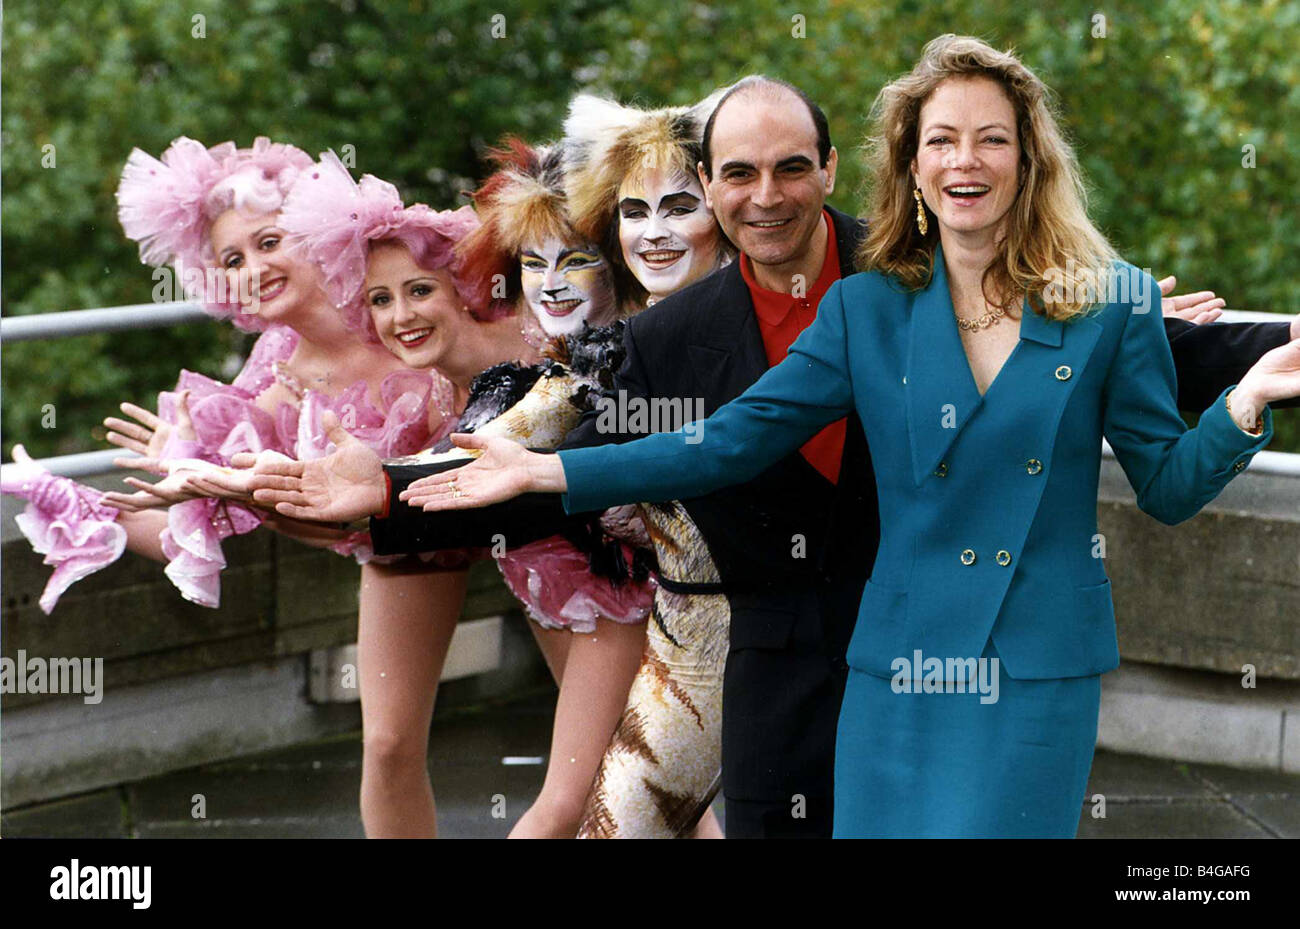 David Suchet Actor With Actress Jenny Seagrove And Girls From The Cast Of Cats The Musical Stock Photo